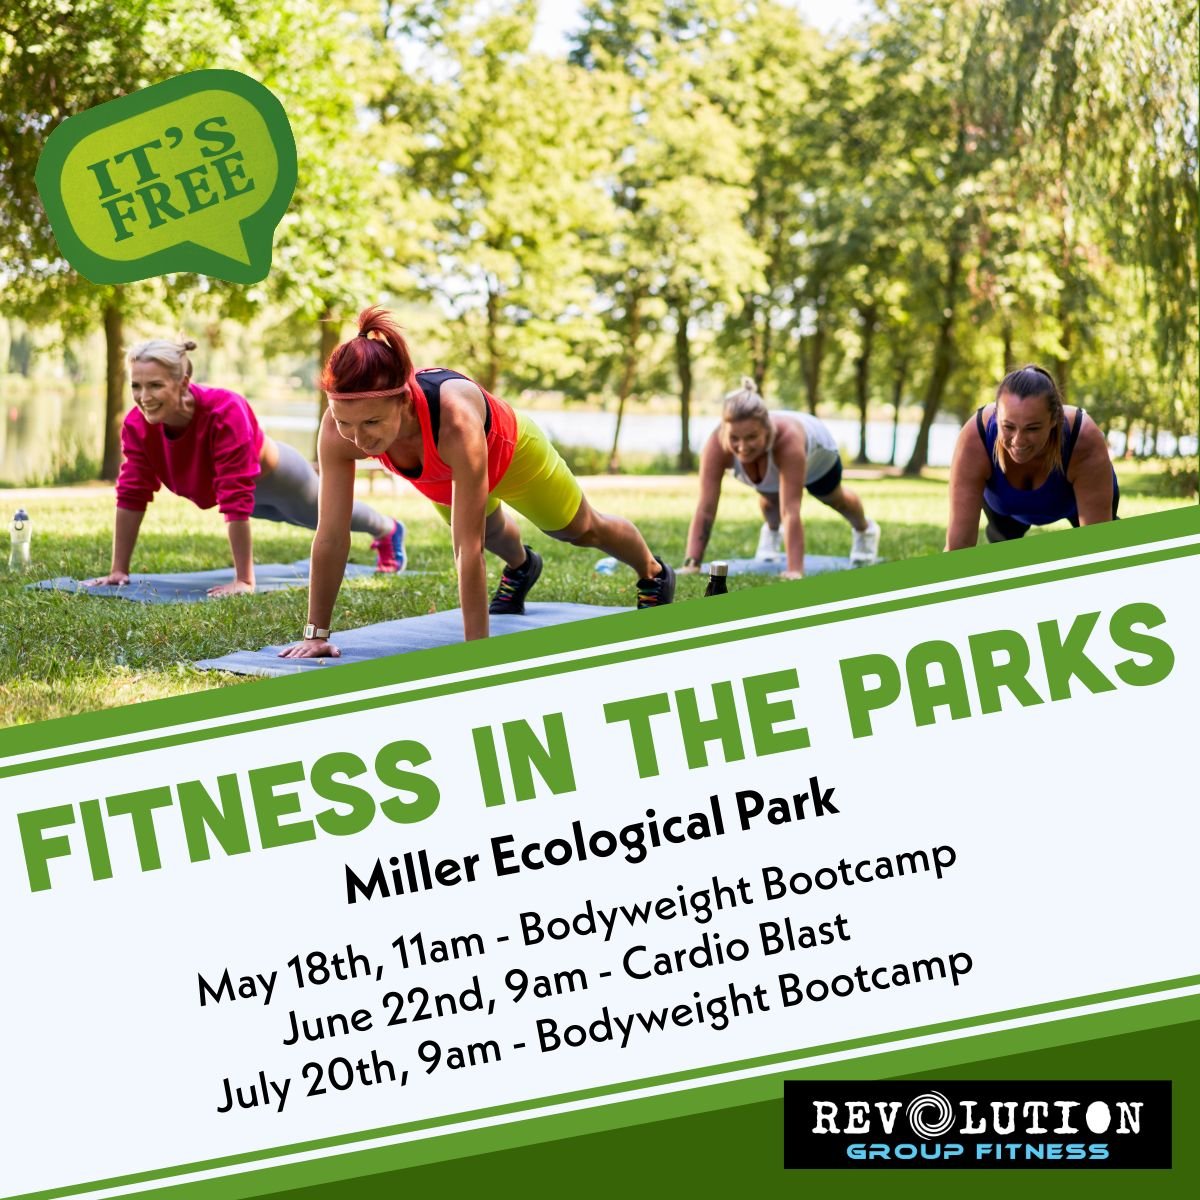 🌞 Looking for some outdoor fitness fun this summer? Look no further! We're excited to announce our partnership with the City of Lebanon for Fitness in the Parks at Miller Ecological Park. Join us for three FREE classes, including two bodyweight boot